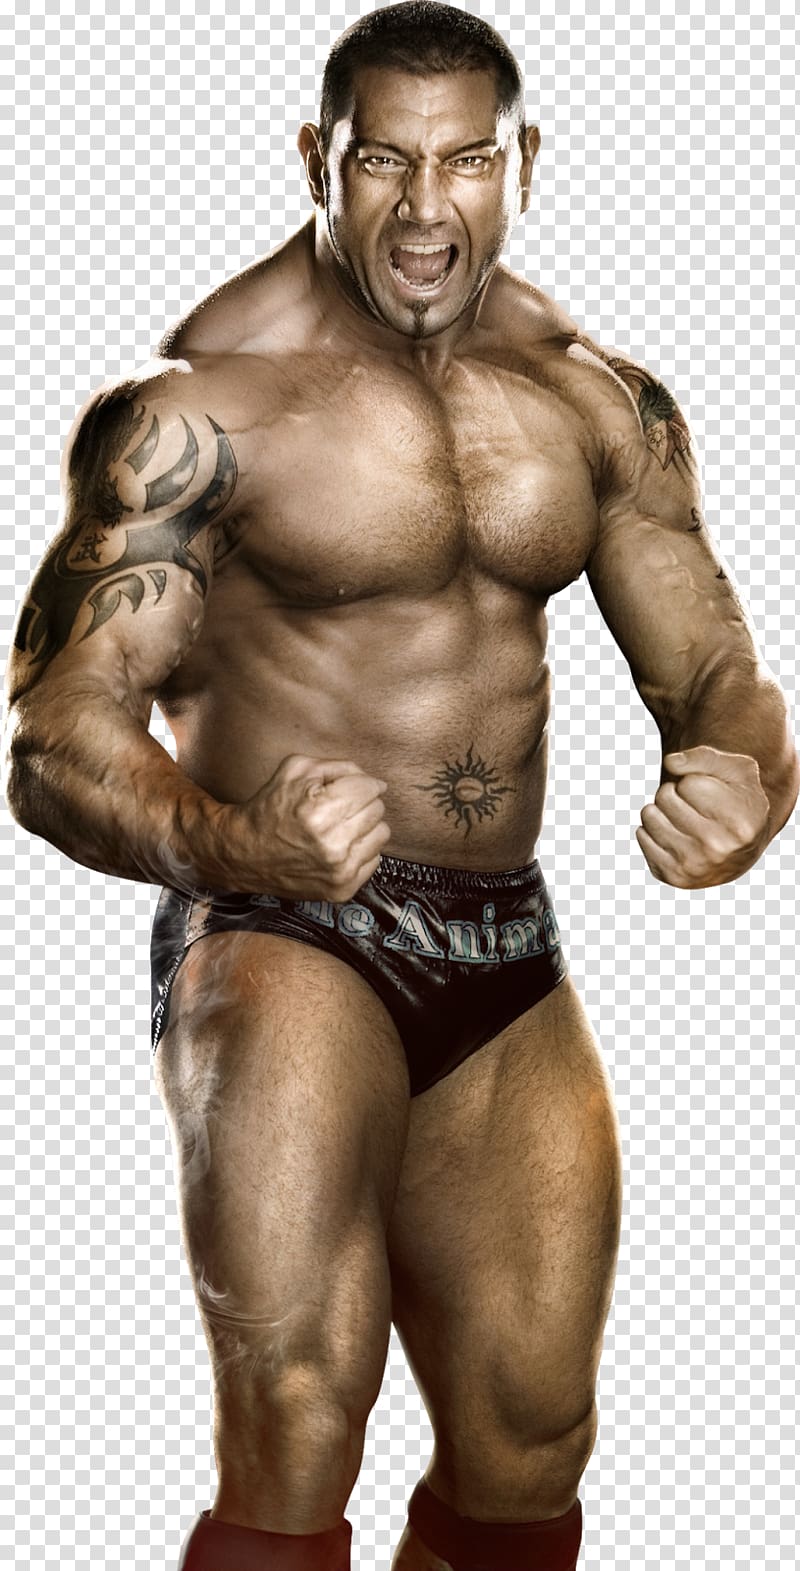 Dave Bautista WWE 2K14 WWE Championship WWE SmackDown! Here Comes the Pain WWE Superstars, Wrestlers transparent background PNG clipart